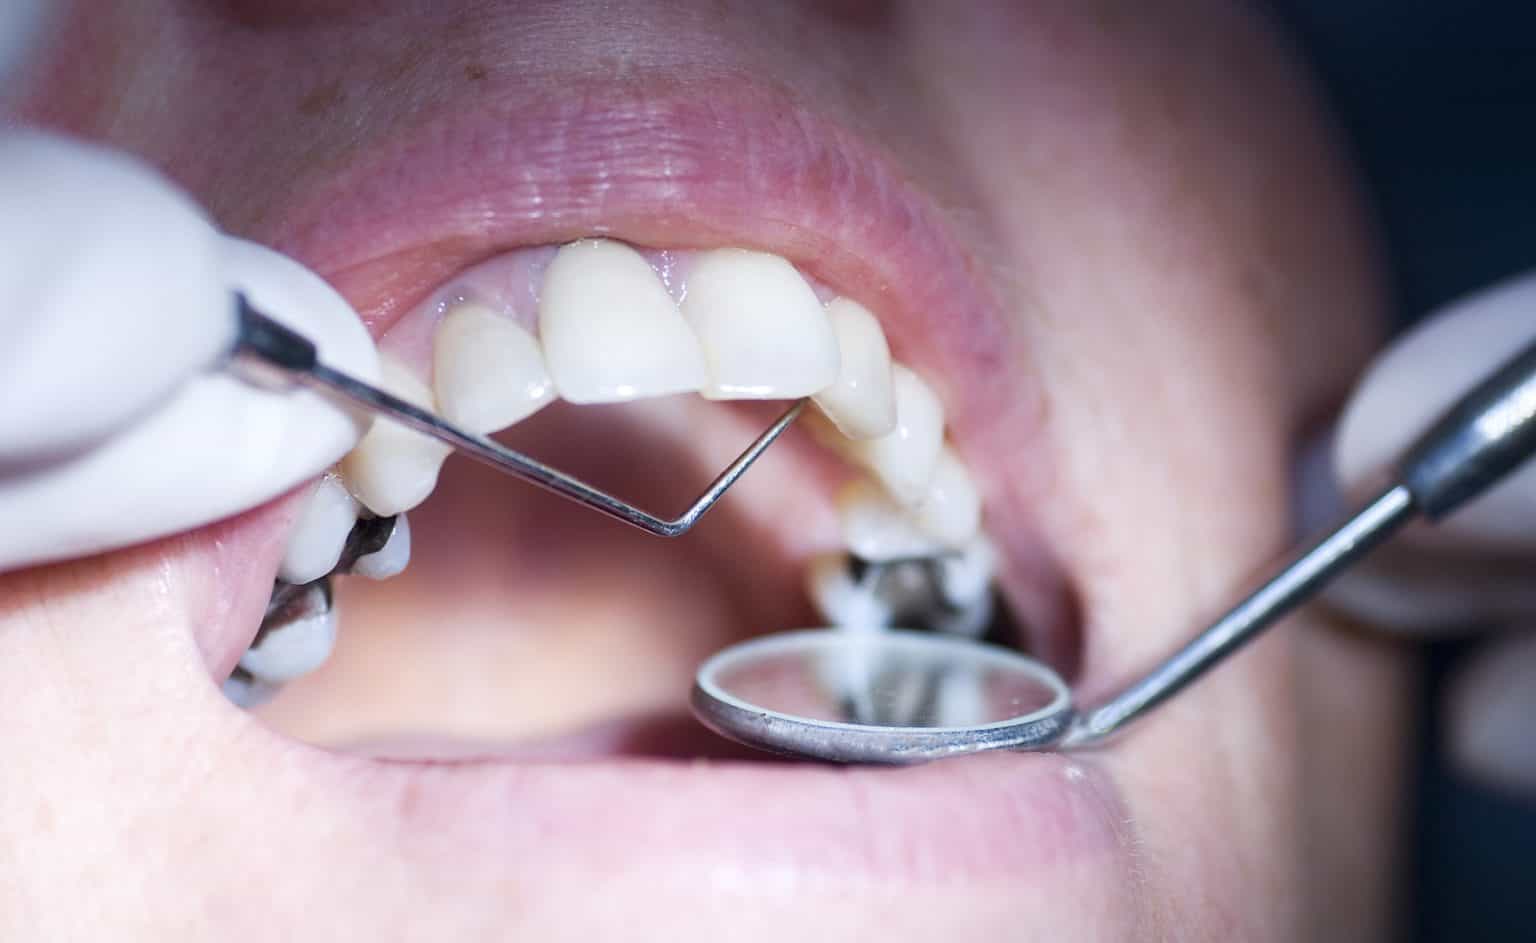 What Are Your Temporary Dental Filling Options? - Dental Aware Australia